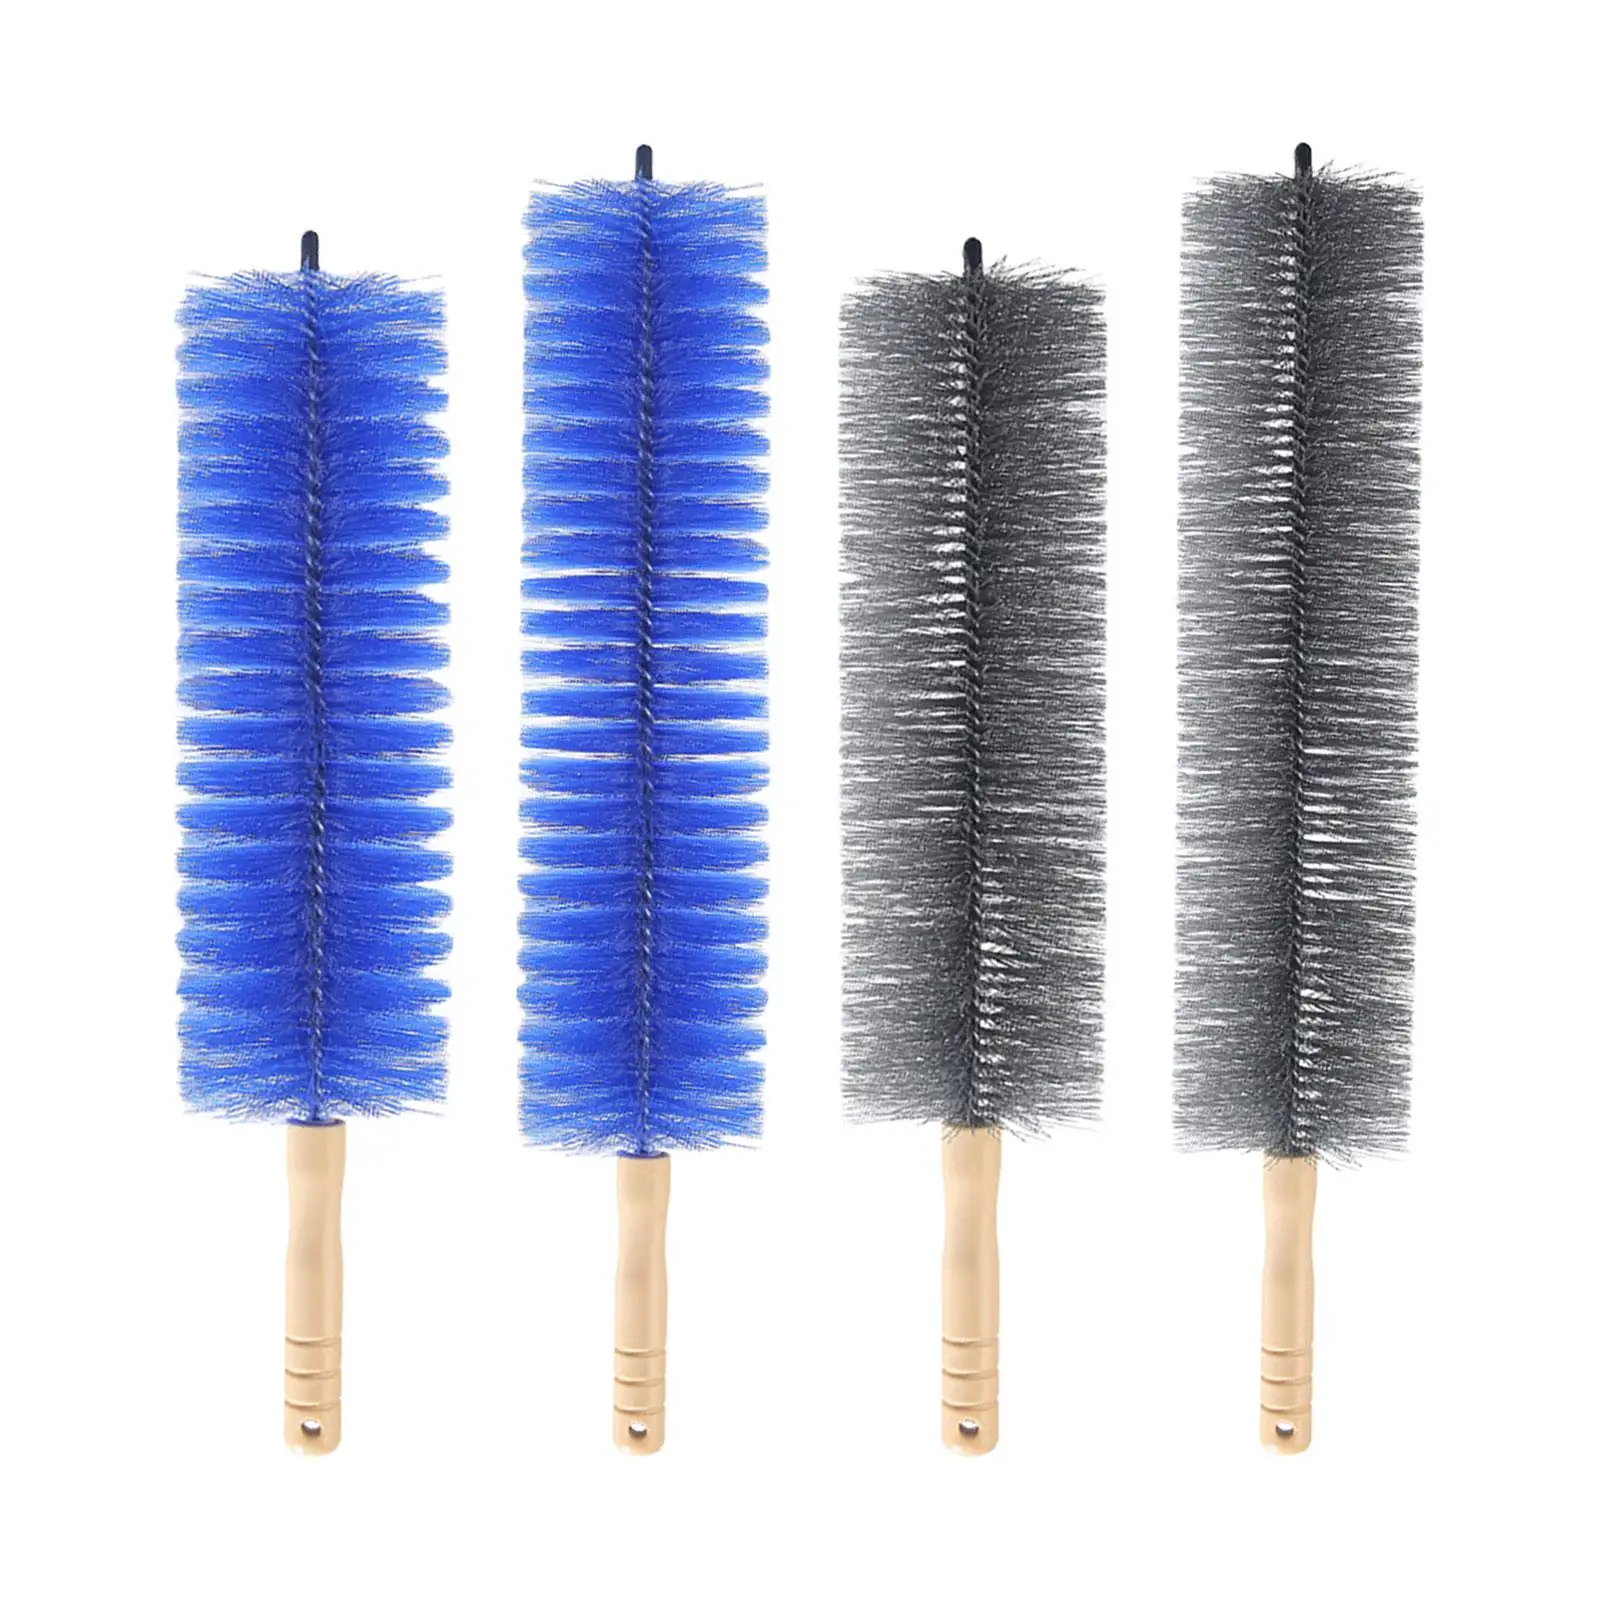 Dust Cleaning Brush Duster Brush for Car Household Electrical Dust Removal